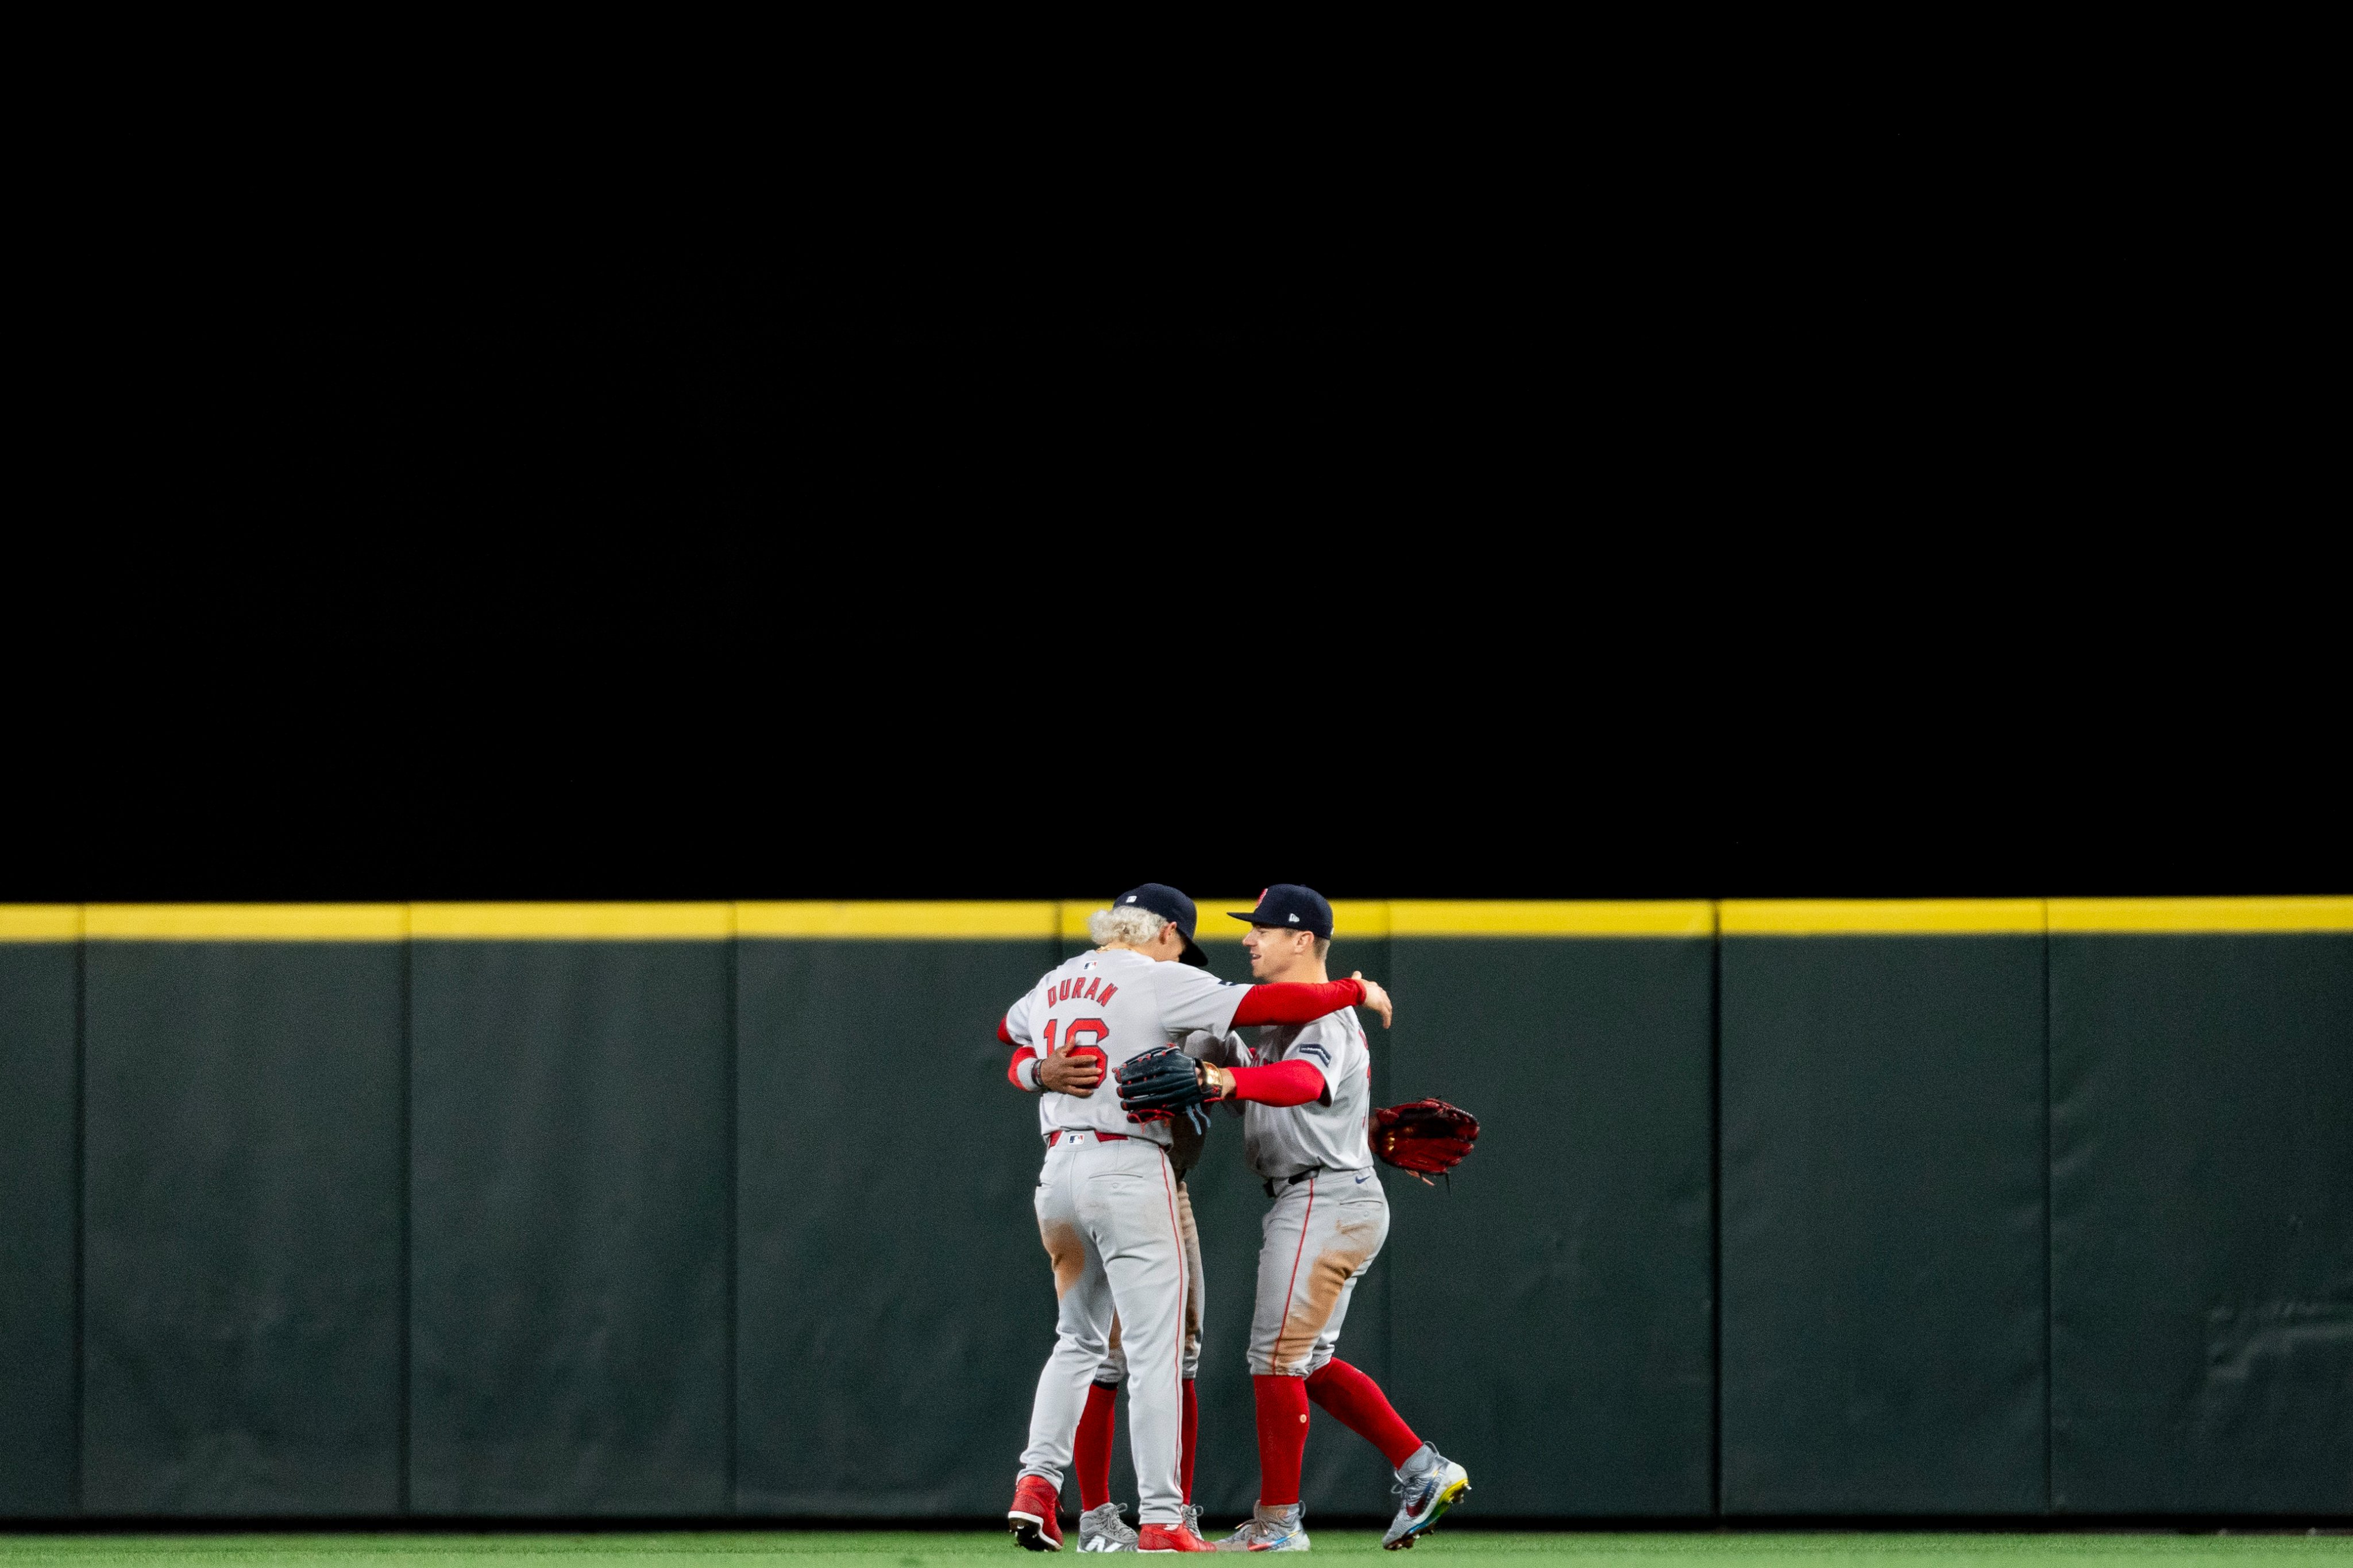 From left to right: Jarren Duran, Ceddanne Rafaela, and Tyler O'Neill hug in the outfield after the Red Sox Opening Day win against the Mariners. 